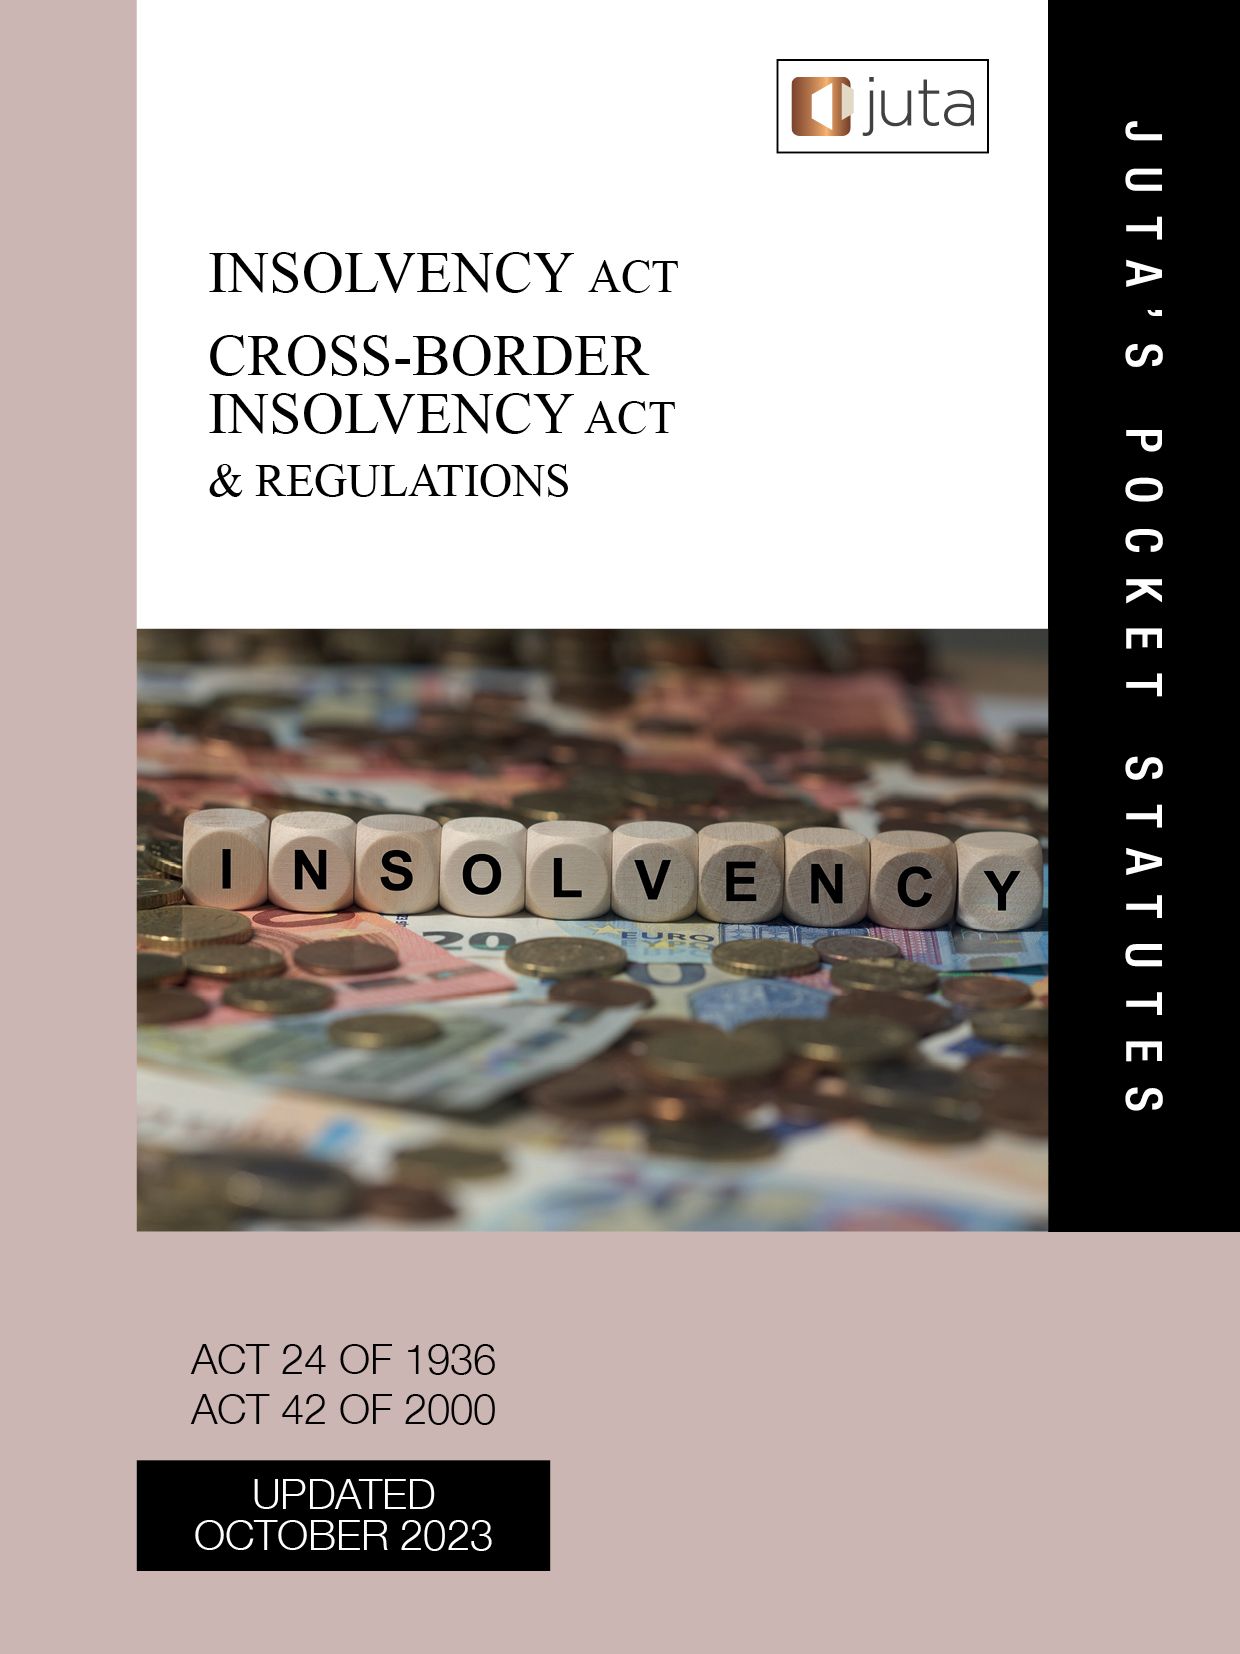 Insolvency Act 24 of 1936; Cross-Border Insolvency Act 42 of 2000 & Regulations